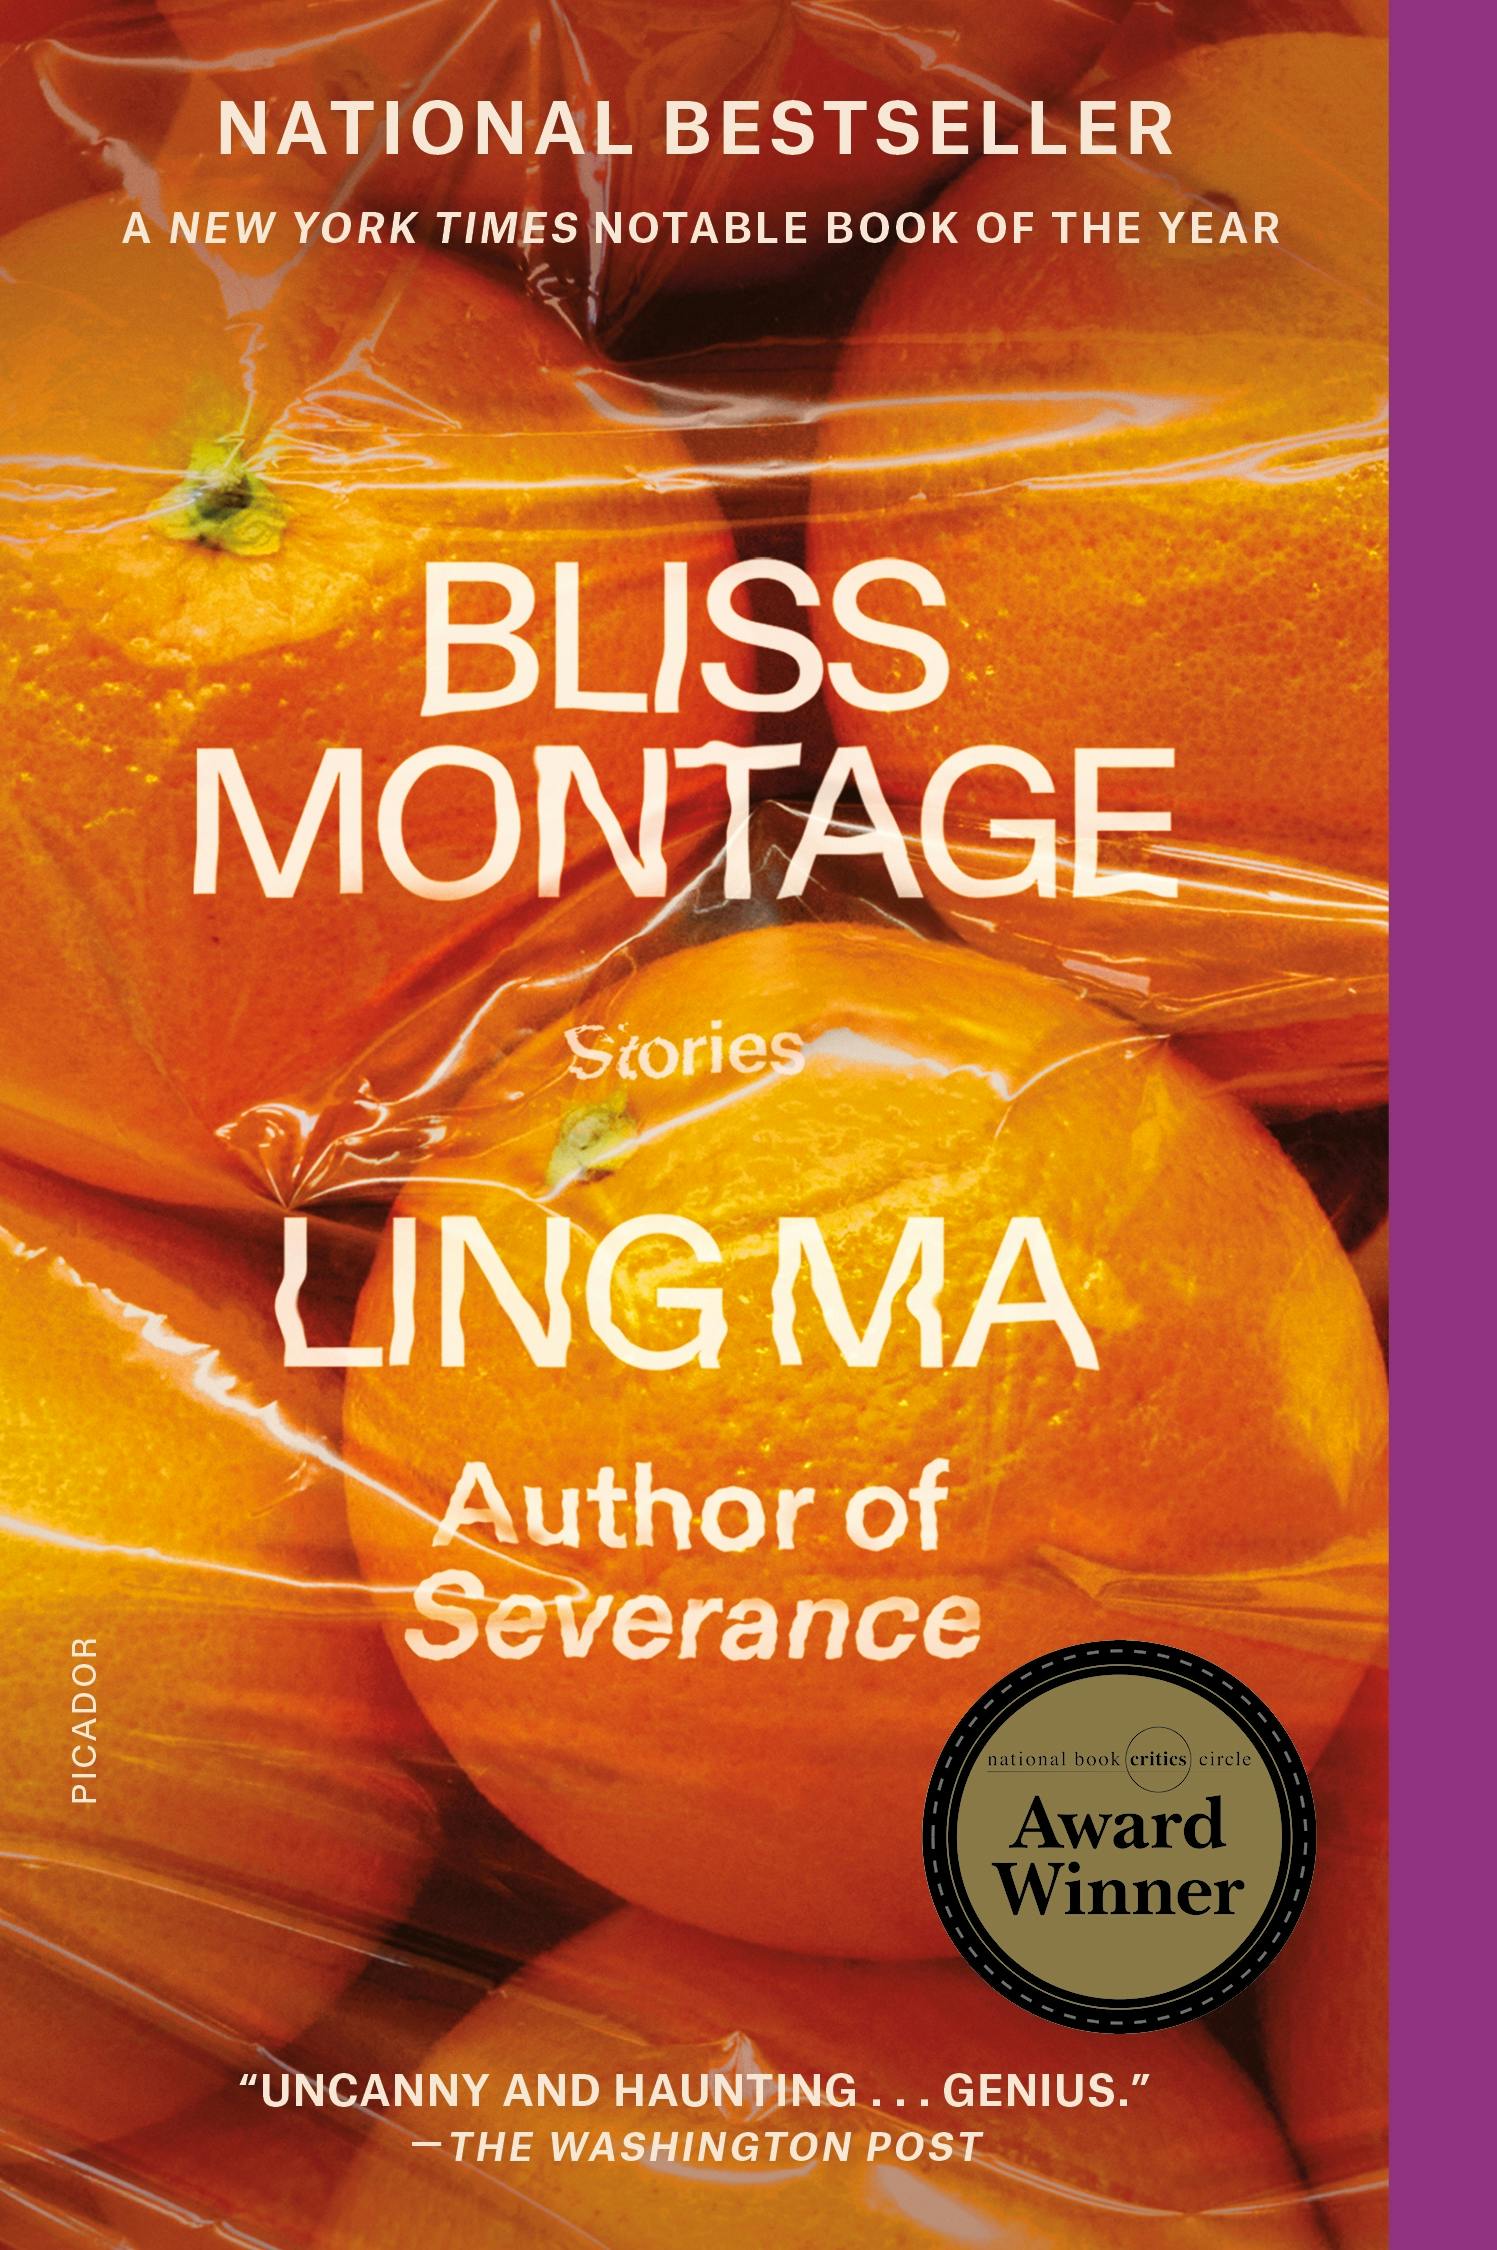 bliss montage ling ma review